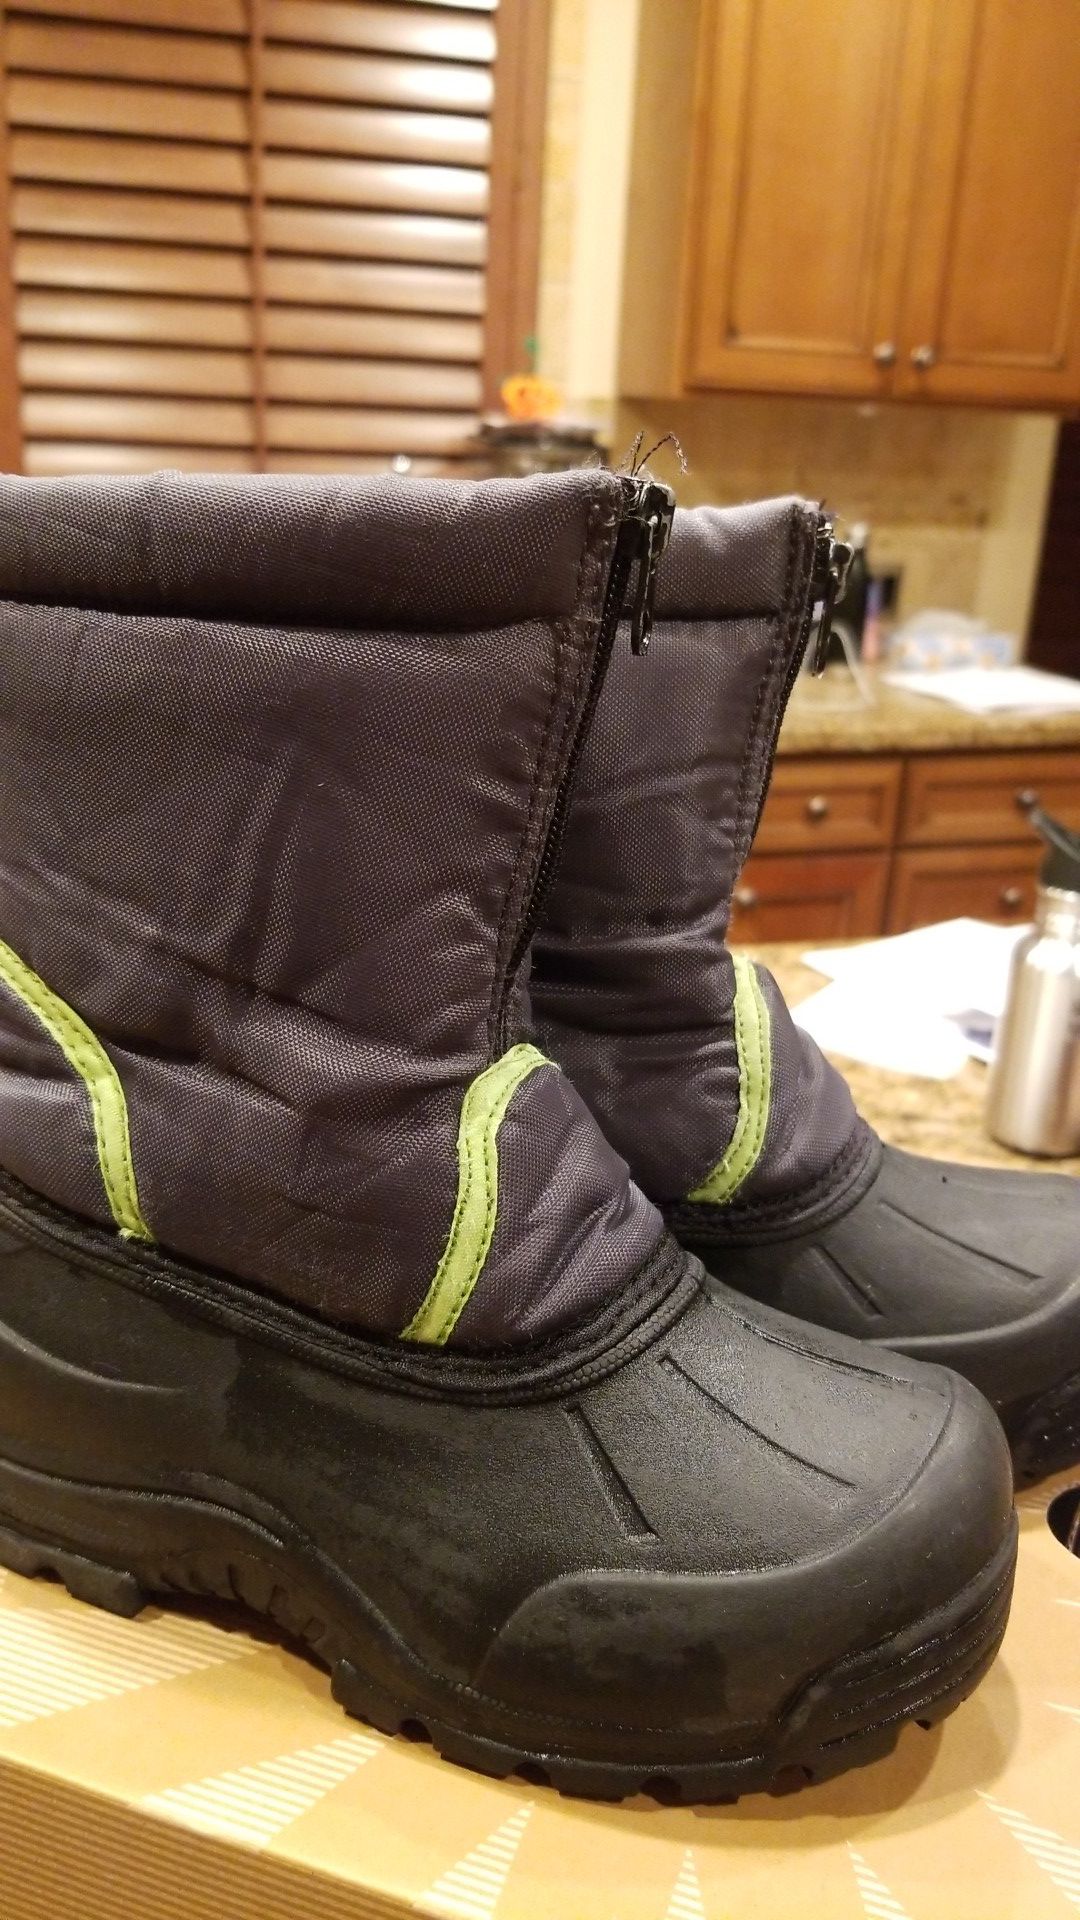 Northside snow boots kids size 12